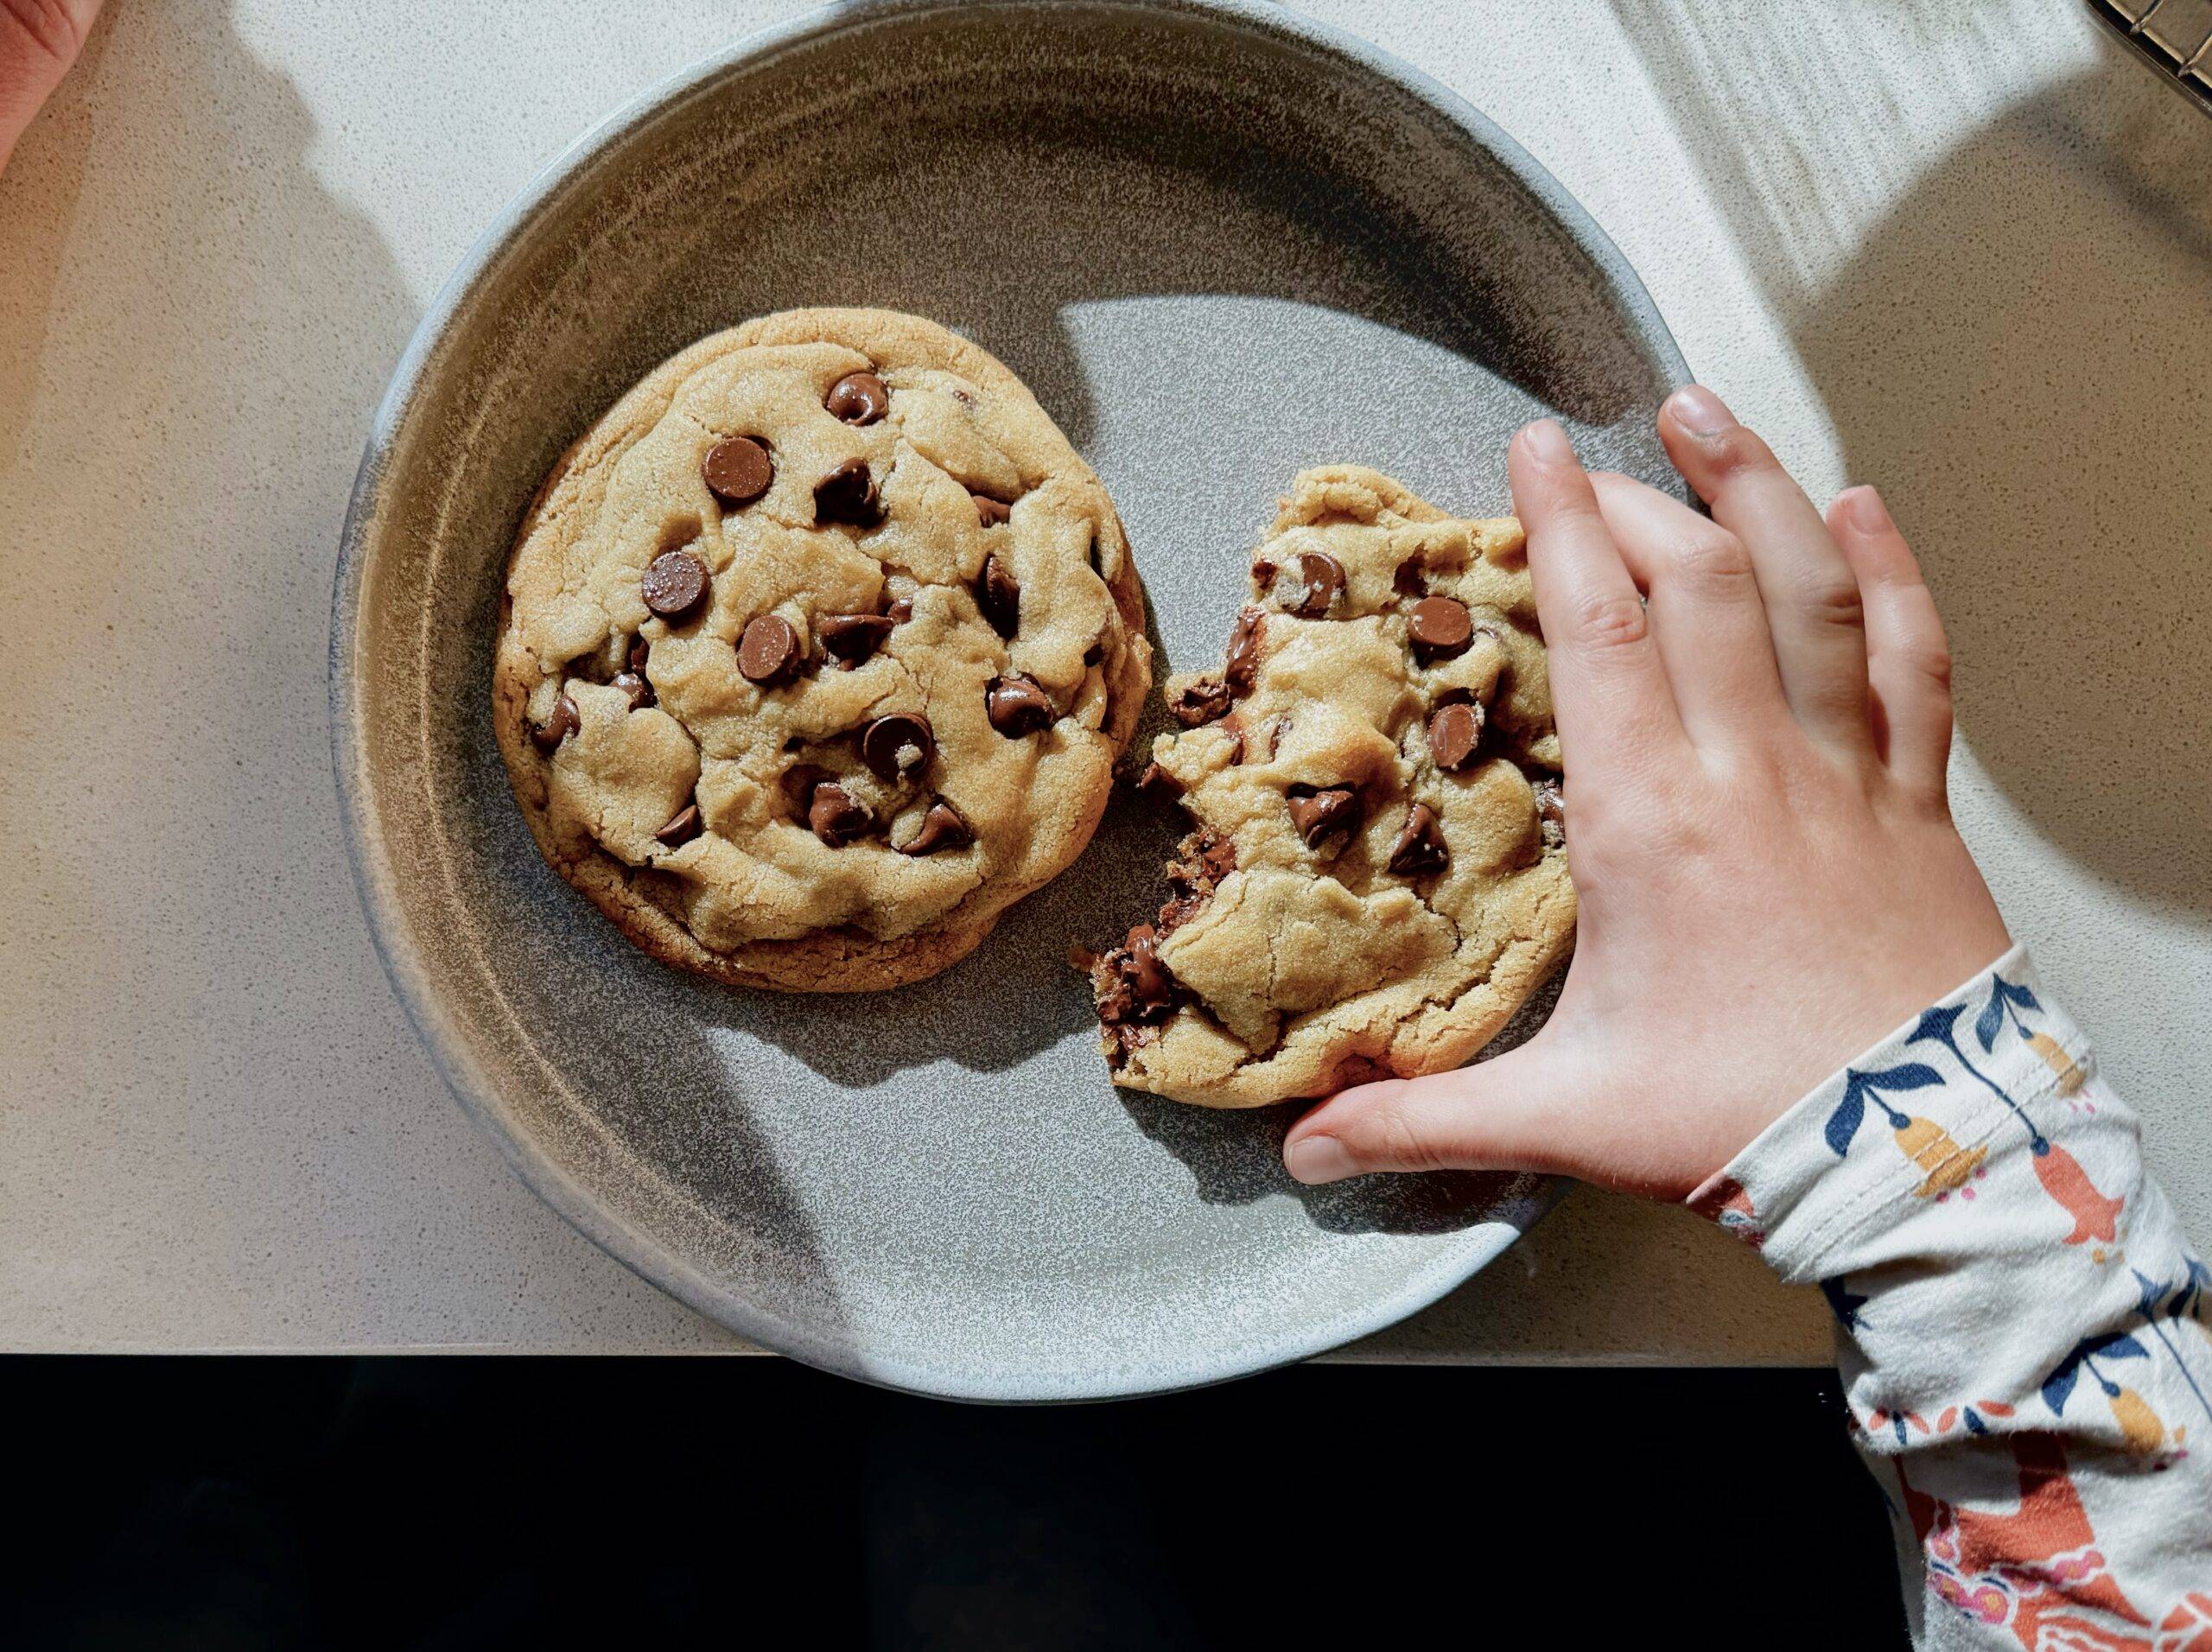 Child's hand reaching for chocolate chip cookie.